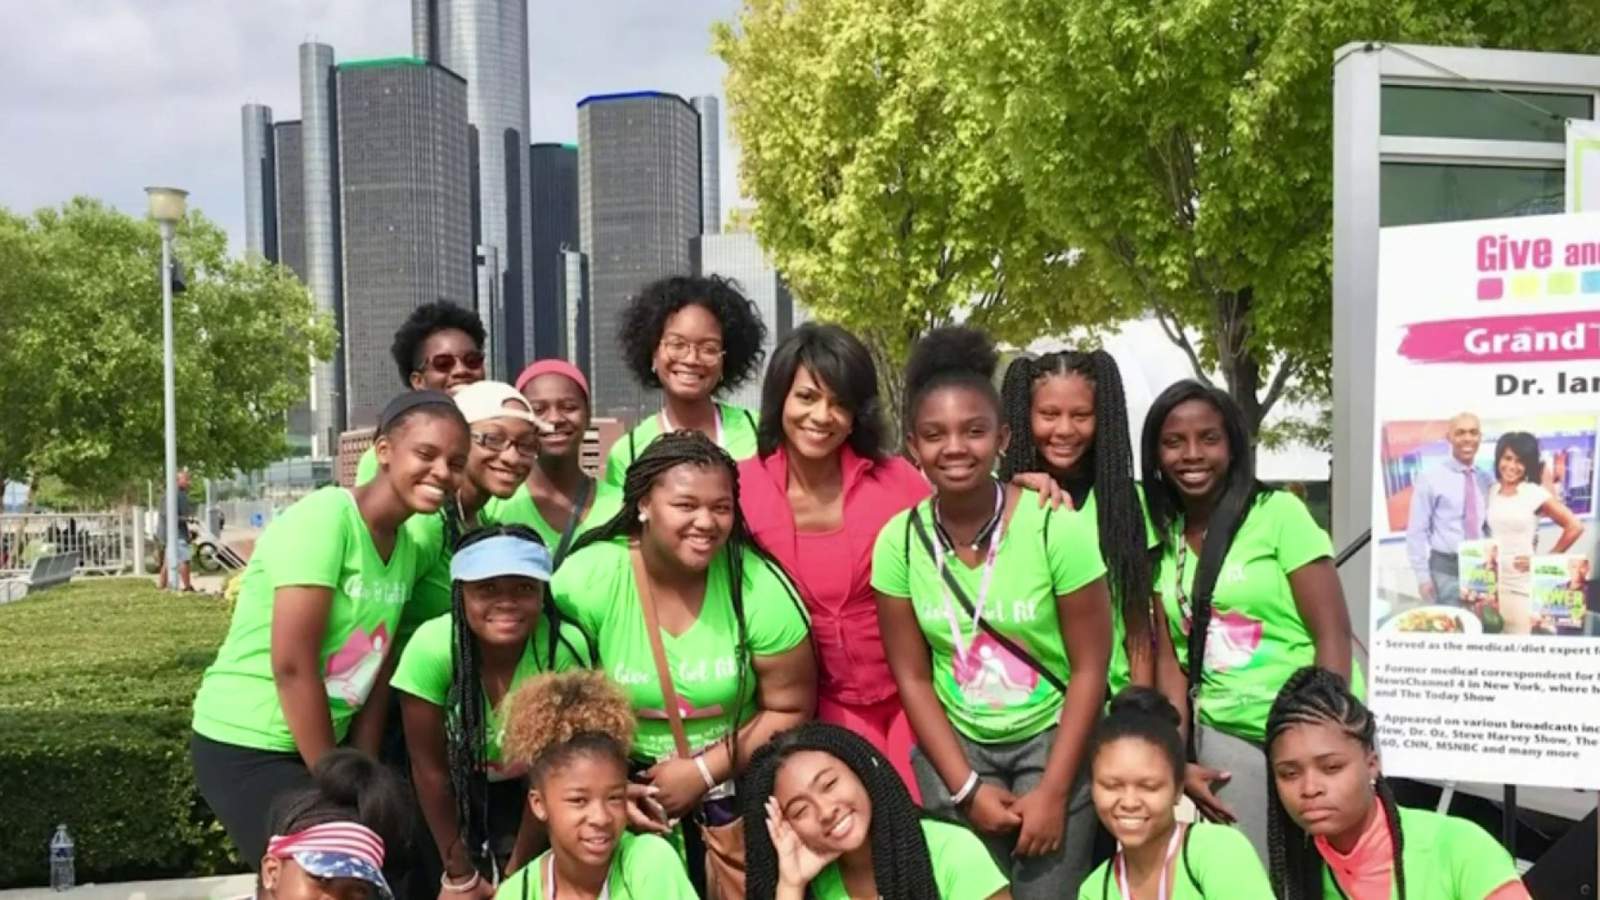 Rhonda Walker Foundation’s Give and Get Fit event goes virtual this year